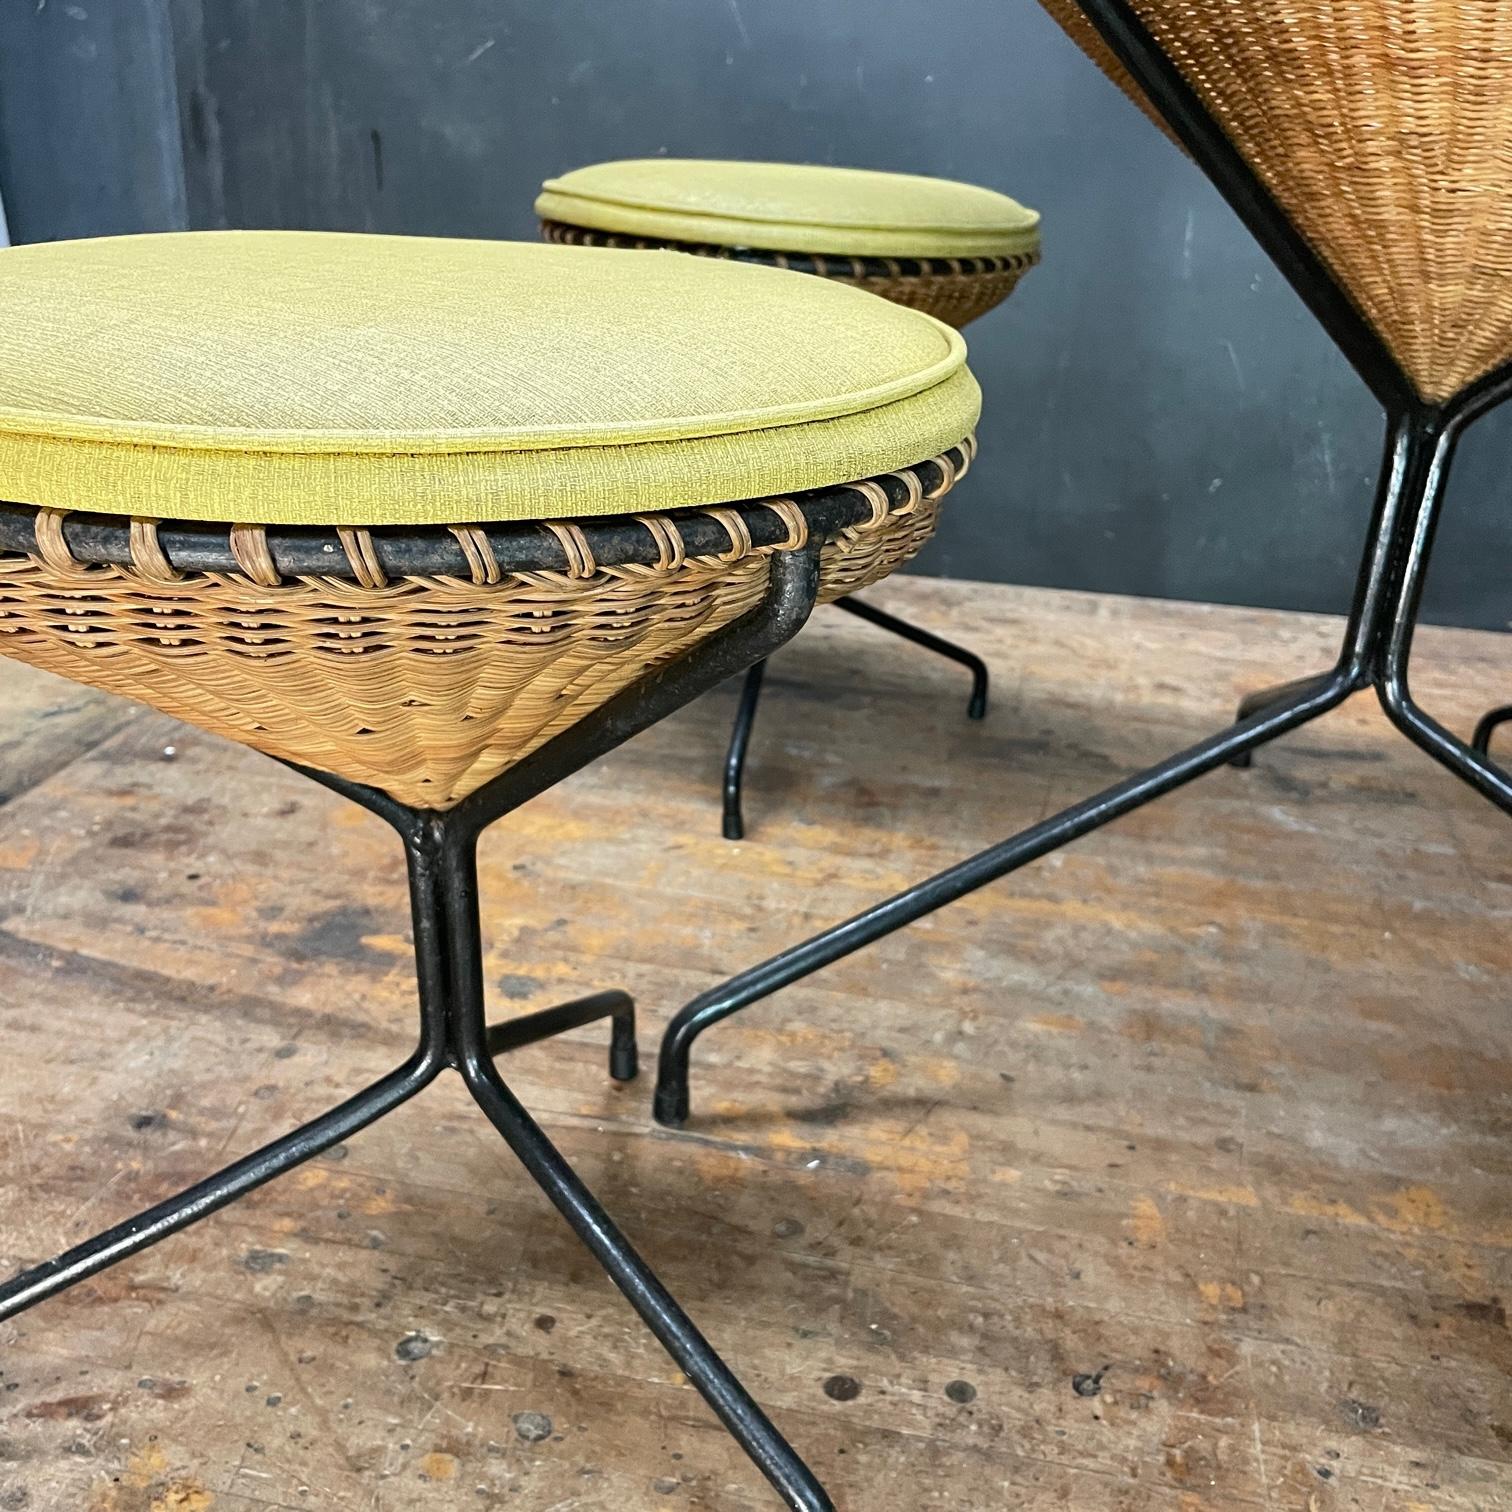 1950s California Design Danny Ho Fong Wicker Iron Tiki Dining Table Stool Set For Sale 1